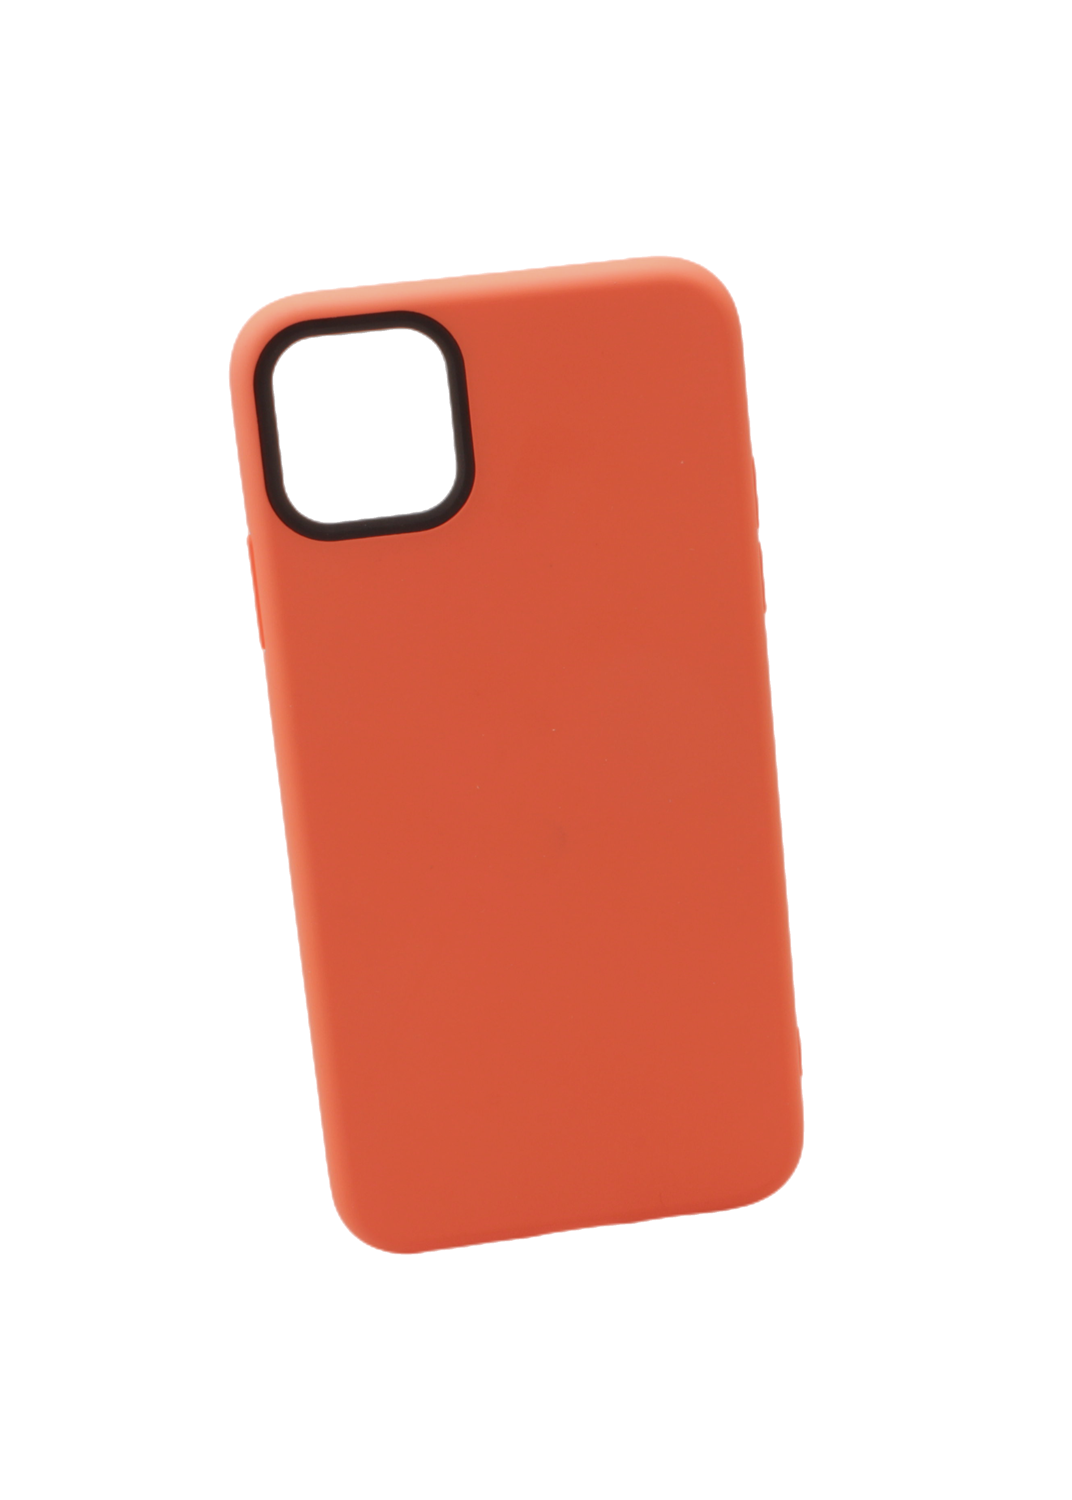 iPhone 11 Pro Max 6.5 Silicone Colorful Back Case 2019, Color: Red